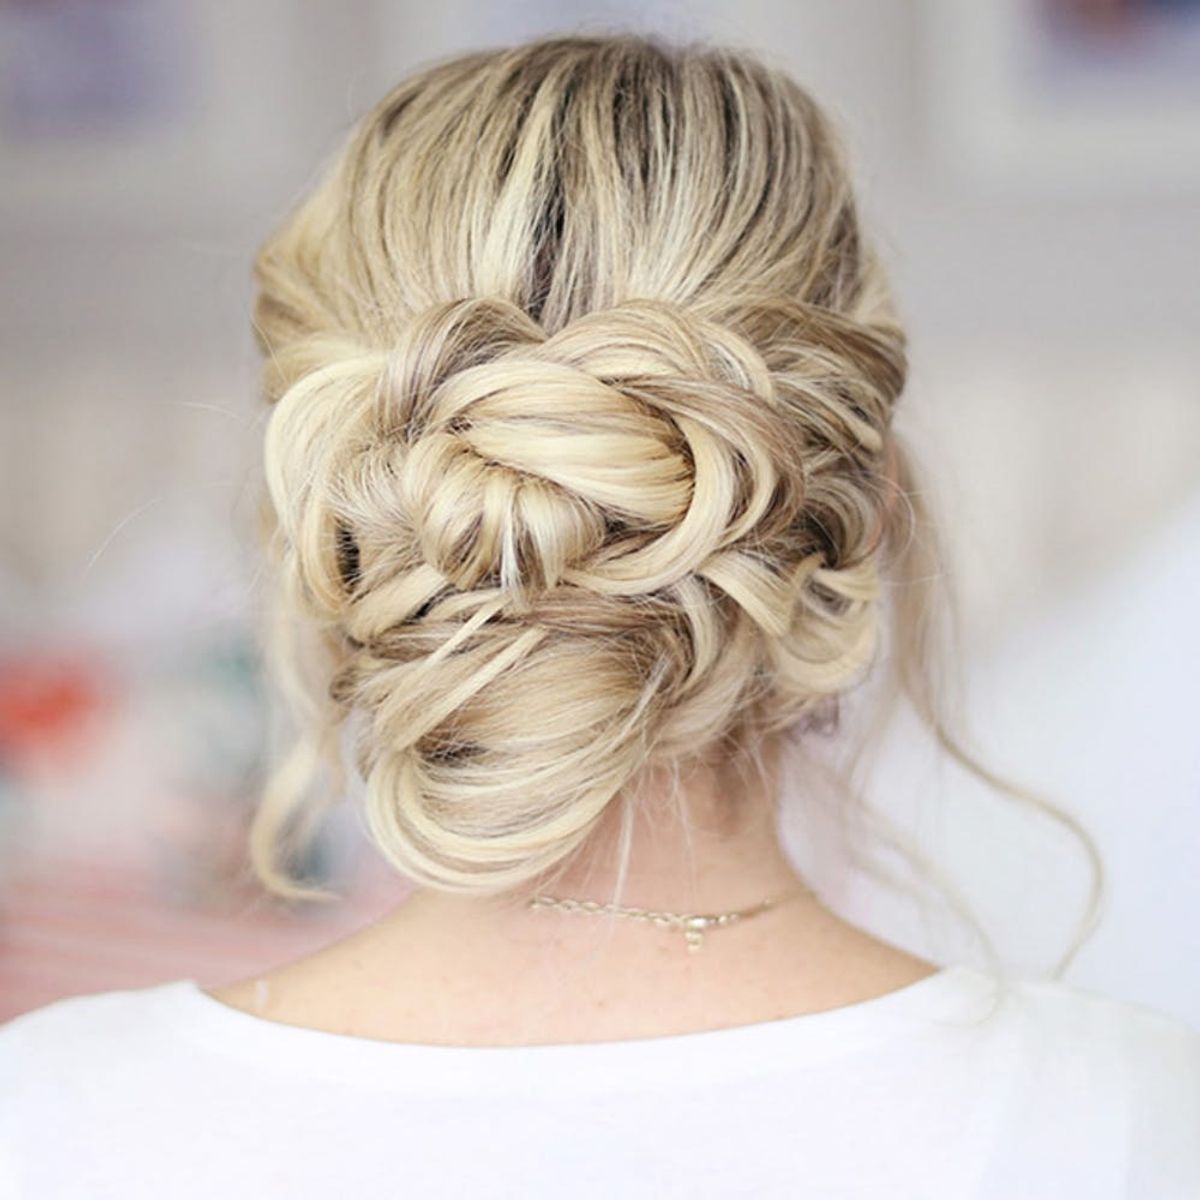 15 Fab Bridal Hairstyles That Take 5 Minutes or Less